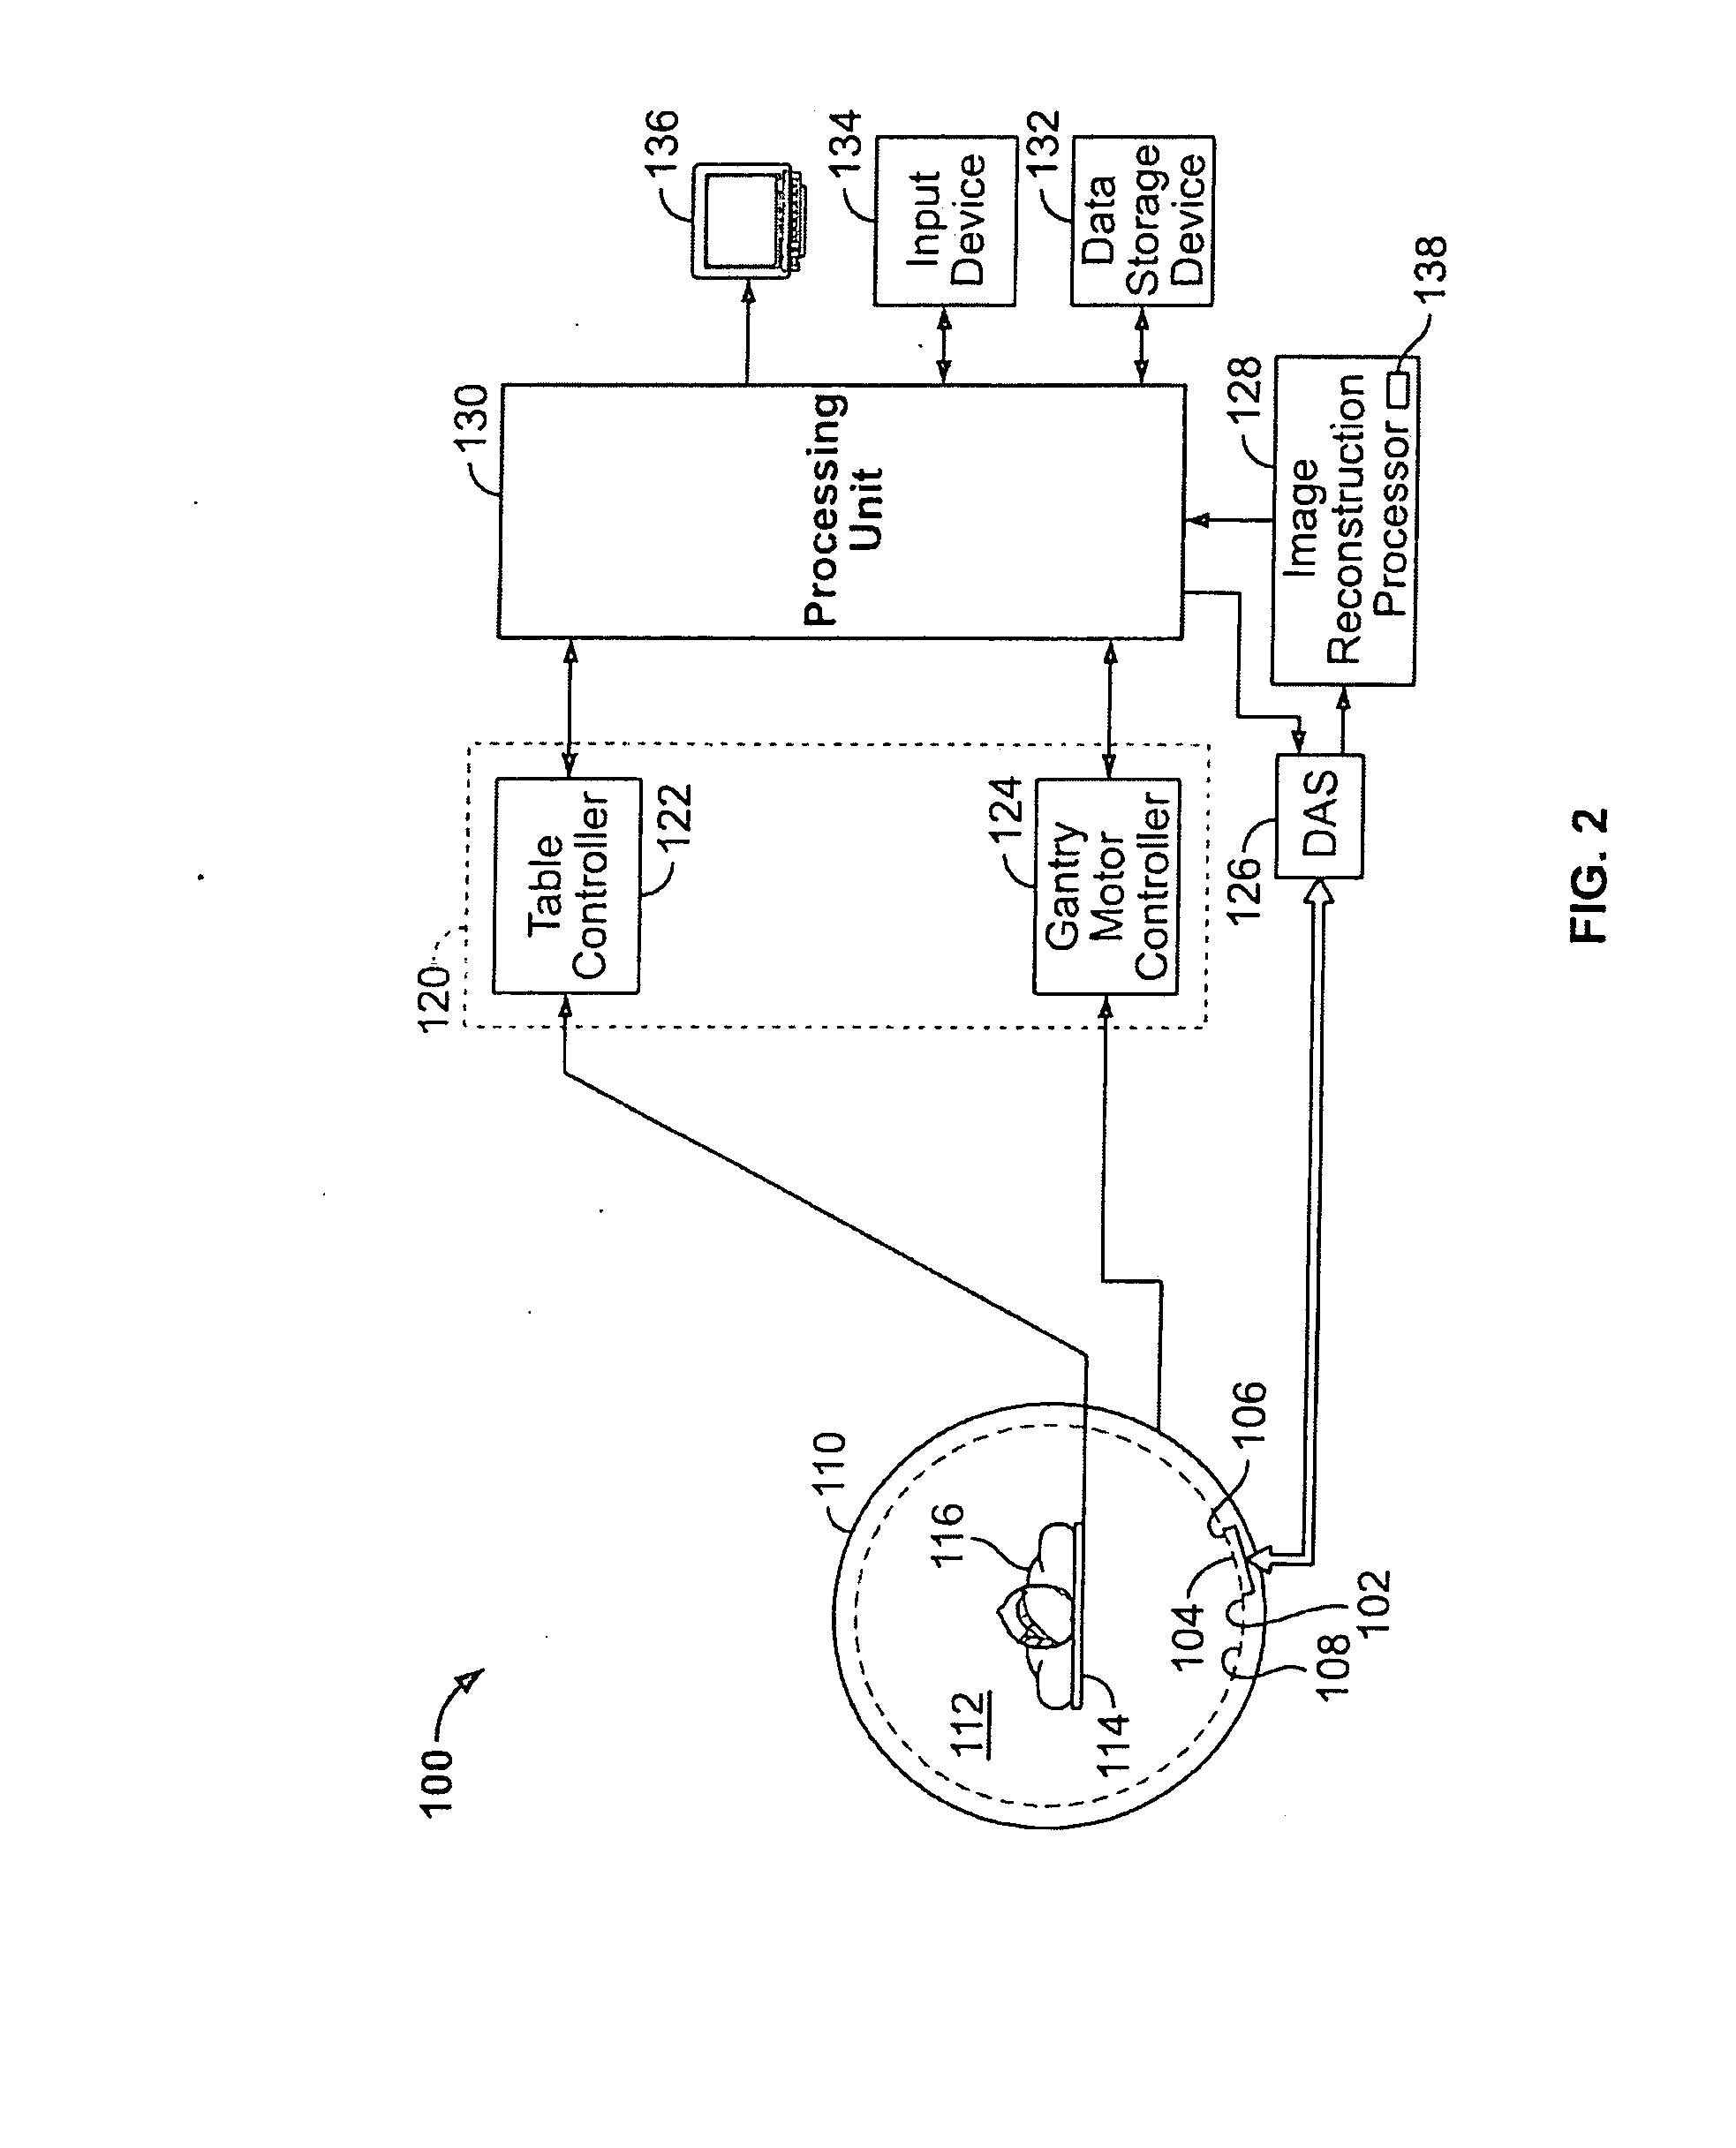 Apparatus and methods for calibrating pixelated detectors